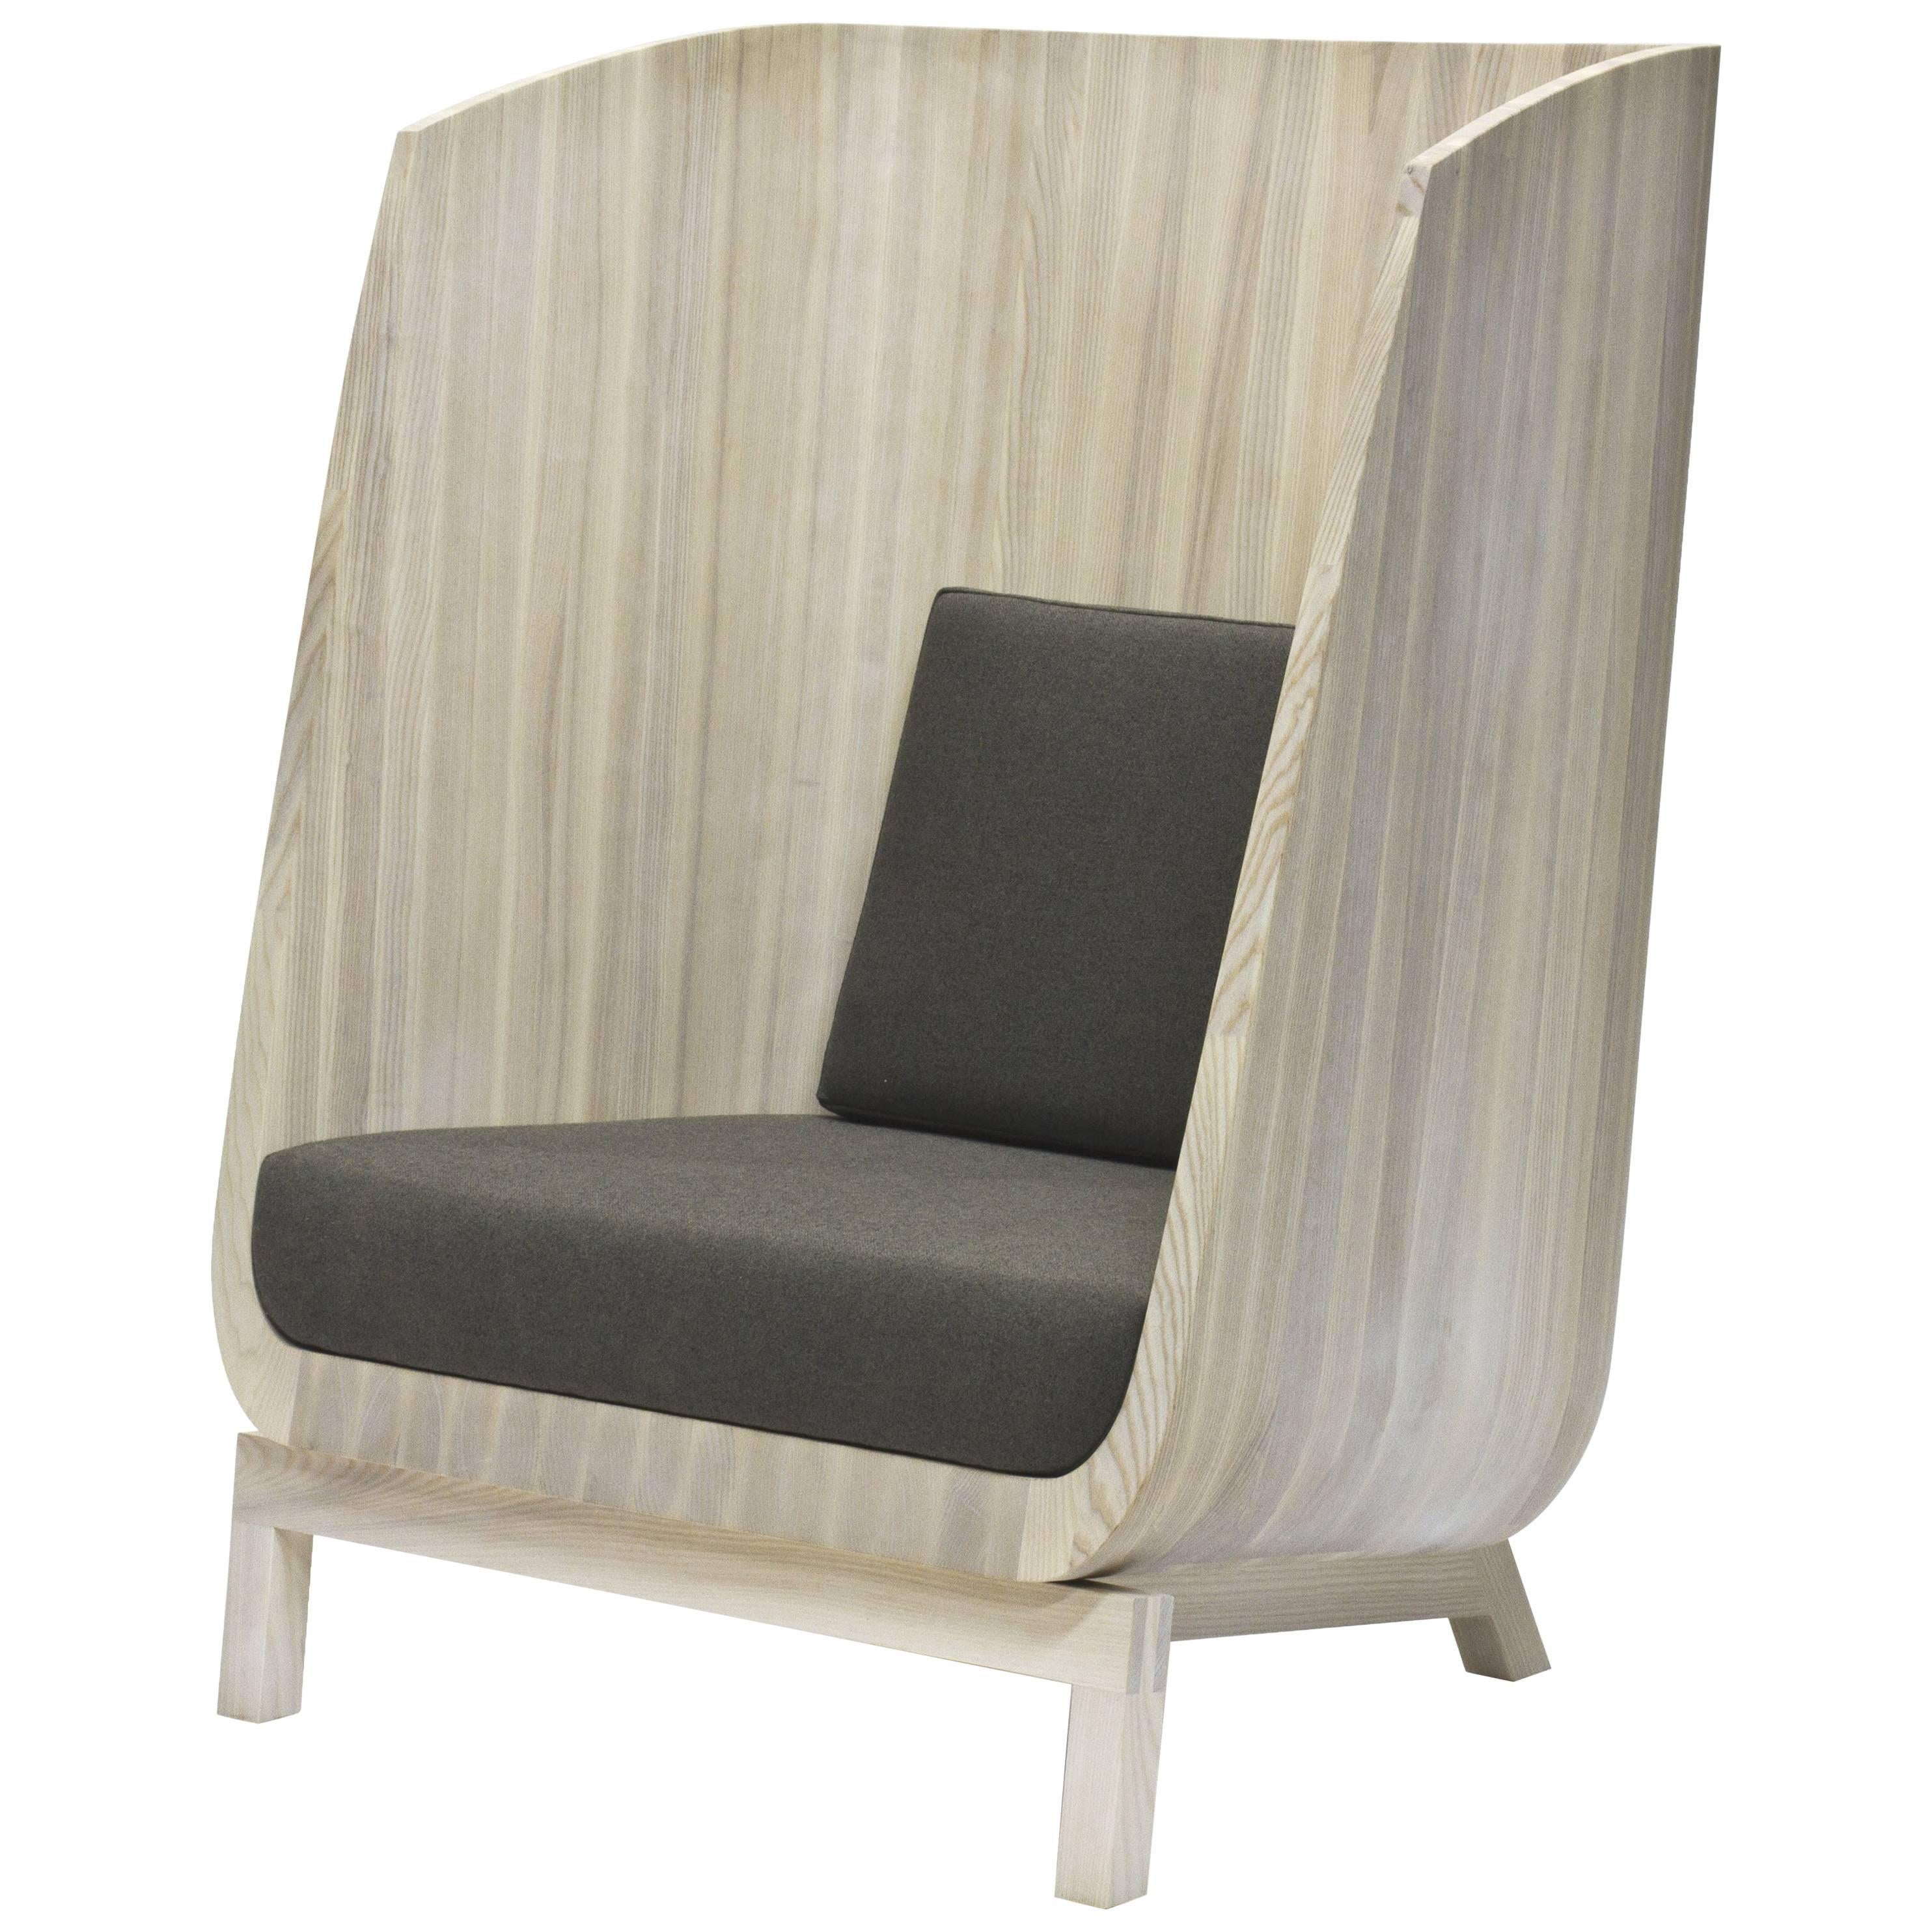 Husk Privacy Chair in Ash with a Winter Wheat Finish by Laura Mays for Wooda For Sale